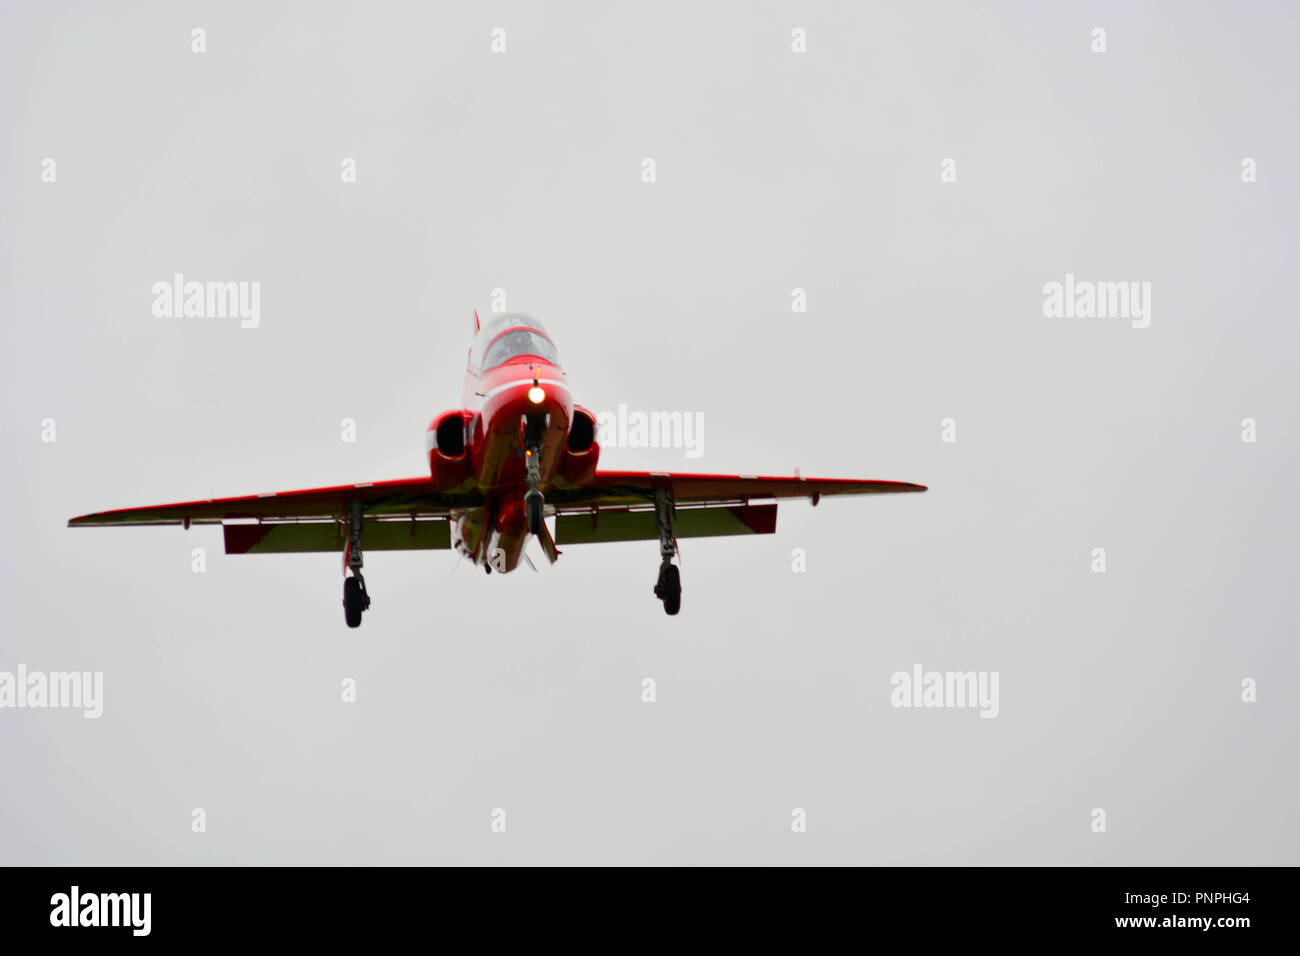 Cambridge UK, 2018-September-22. The Red Arrows arriving at Marshall Aerospace before their schedualed air display at Duxford later today to celebrate 100 years of the RAF. Stock Photo